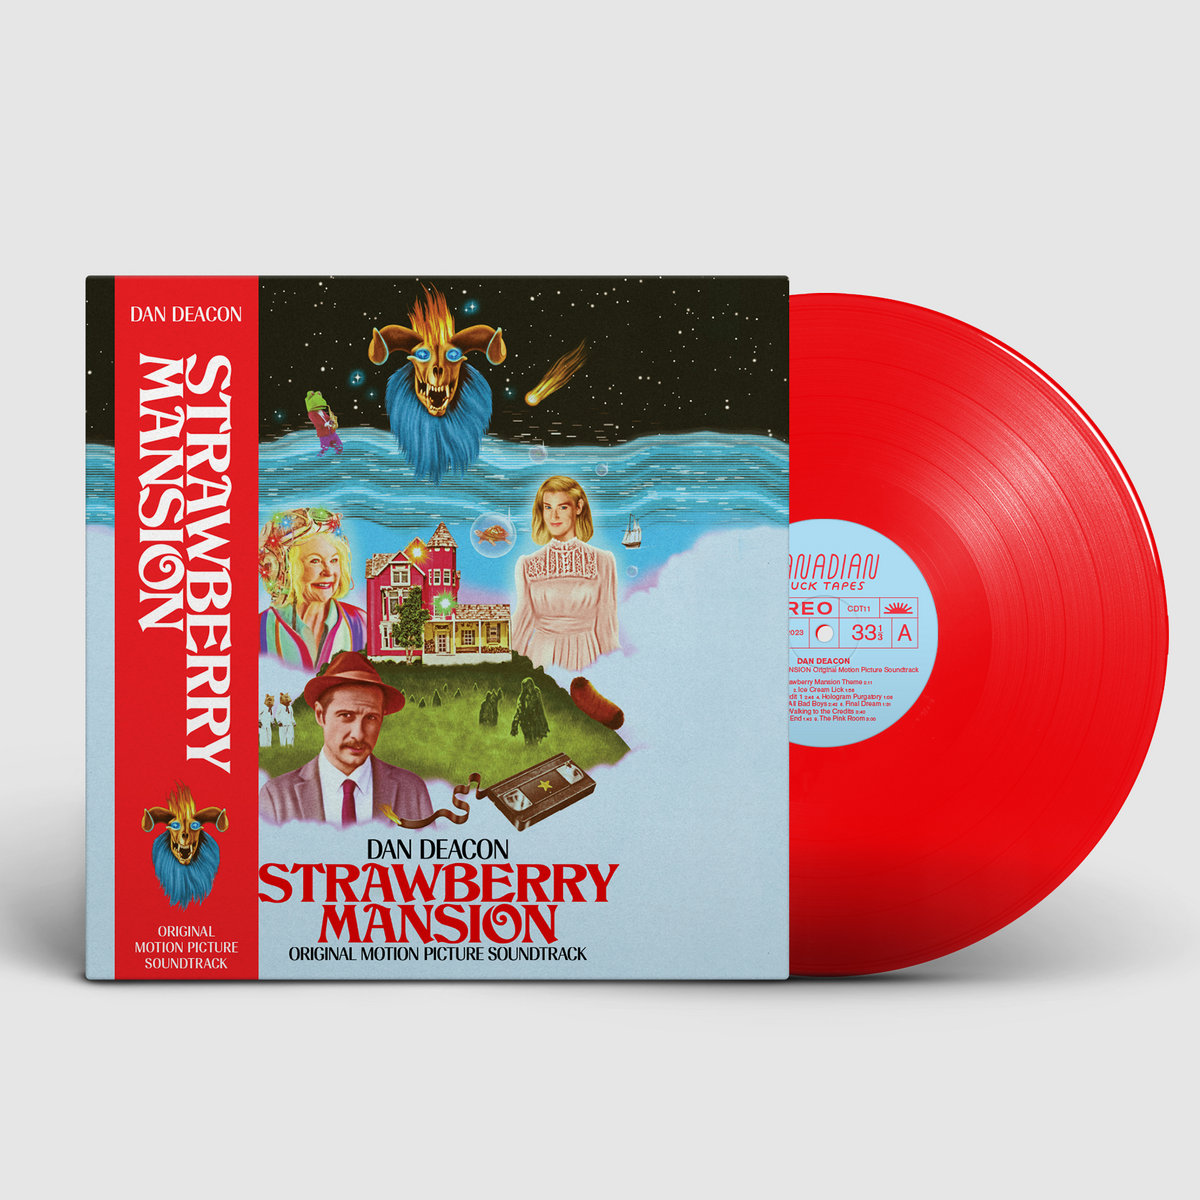 Vinyl LPs are finally out! Strawberry Mansion soundtrack by @ebaynetflix. Released by @Canadianducktps. Includes some extended jam/early demos that are only on the vinyl. canadianducktapes.bandcamp.com/album/strawber…